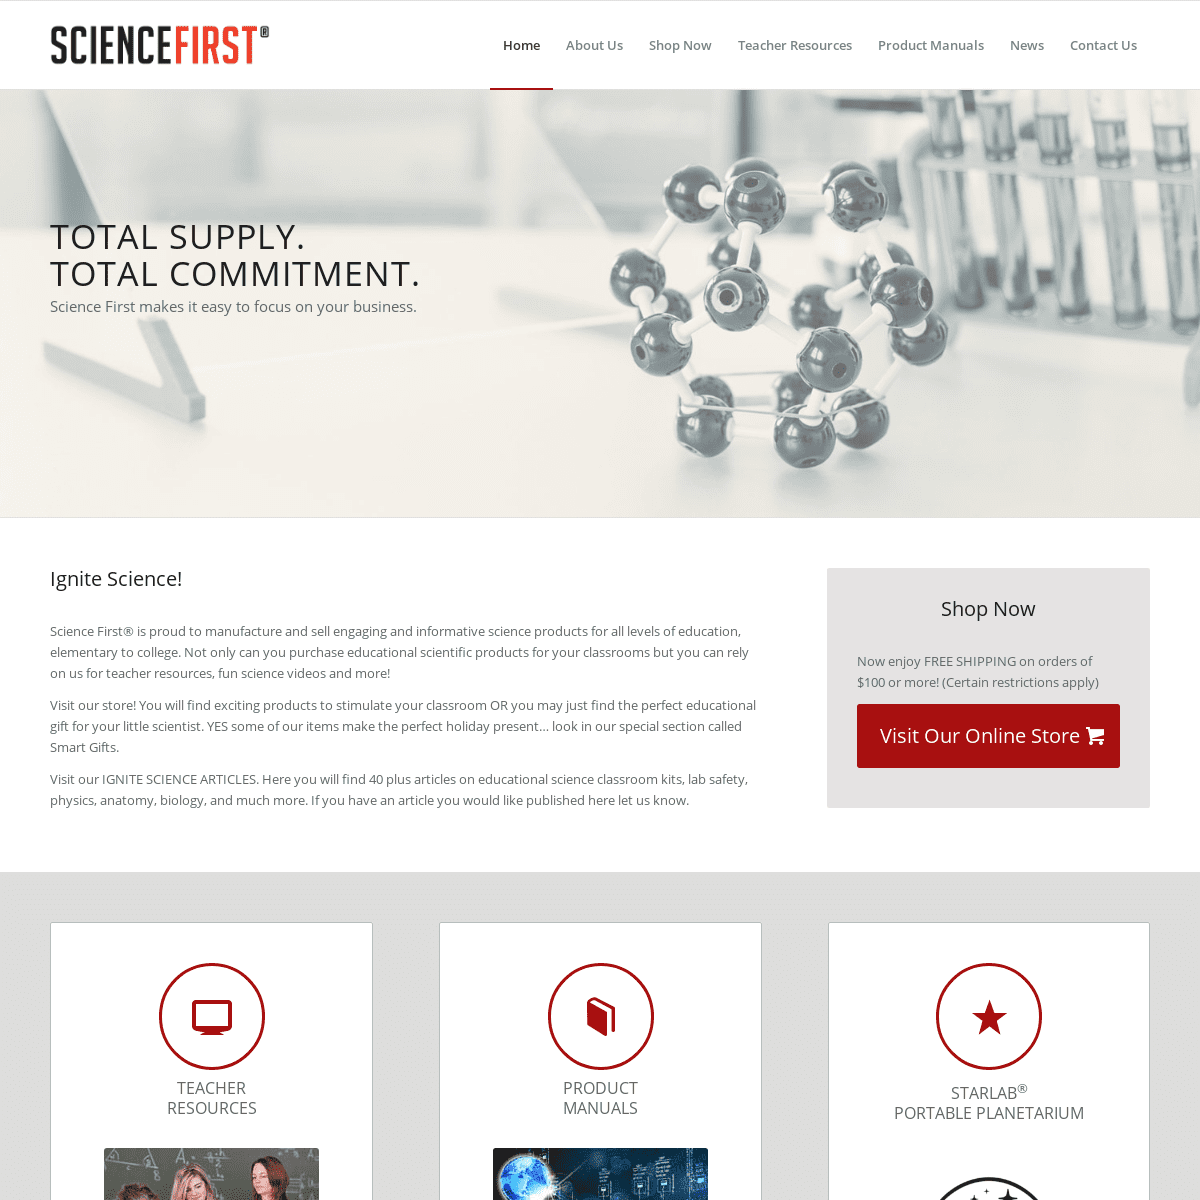 A complete backup of sciencefirst.com